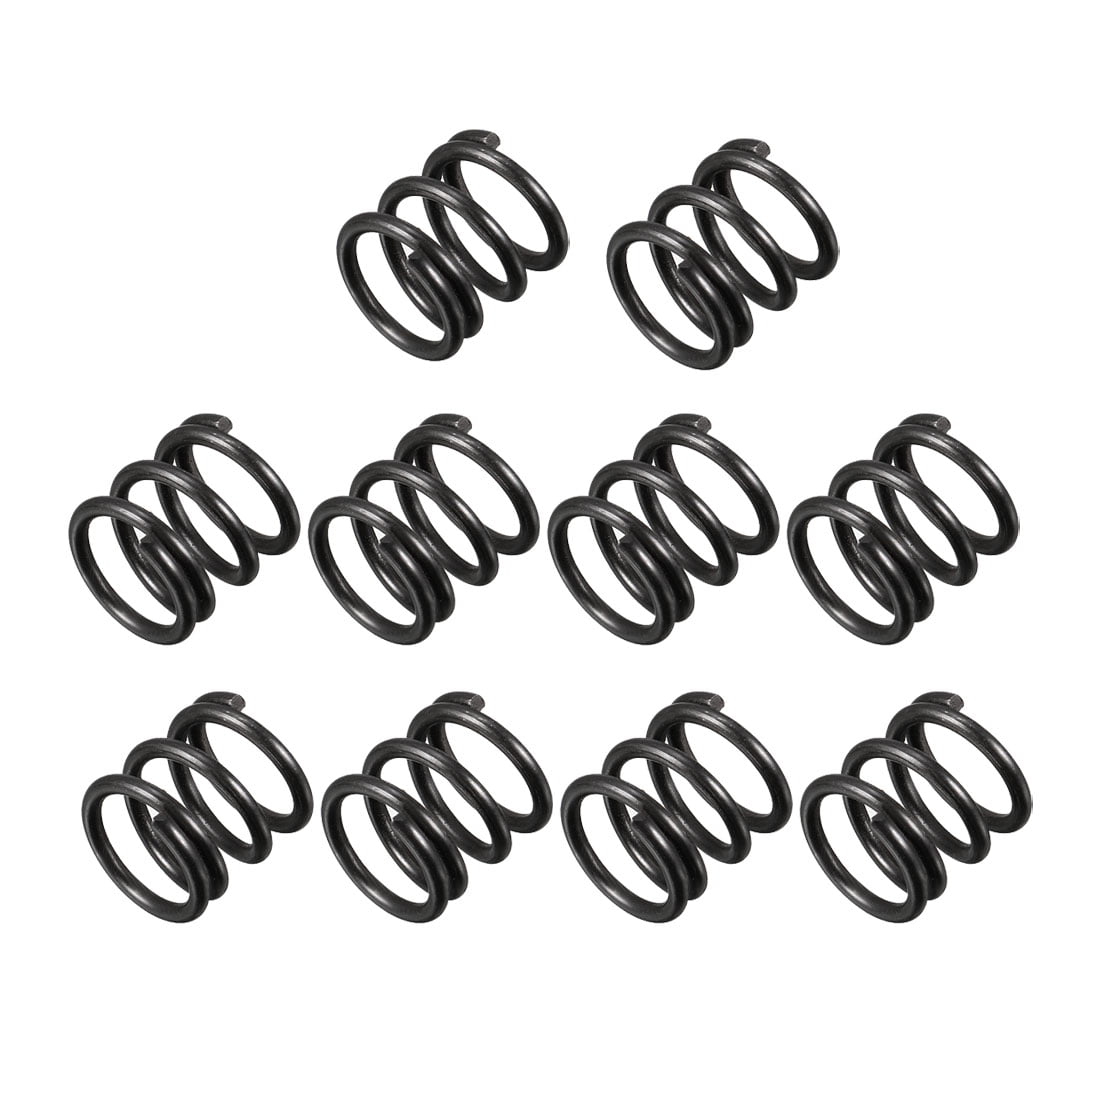 10mm Outer Diameter 1.2mm Wire Dia 10mm Long Compression Spring 10Pcs 